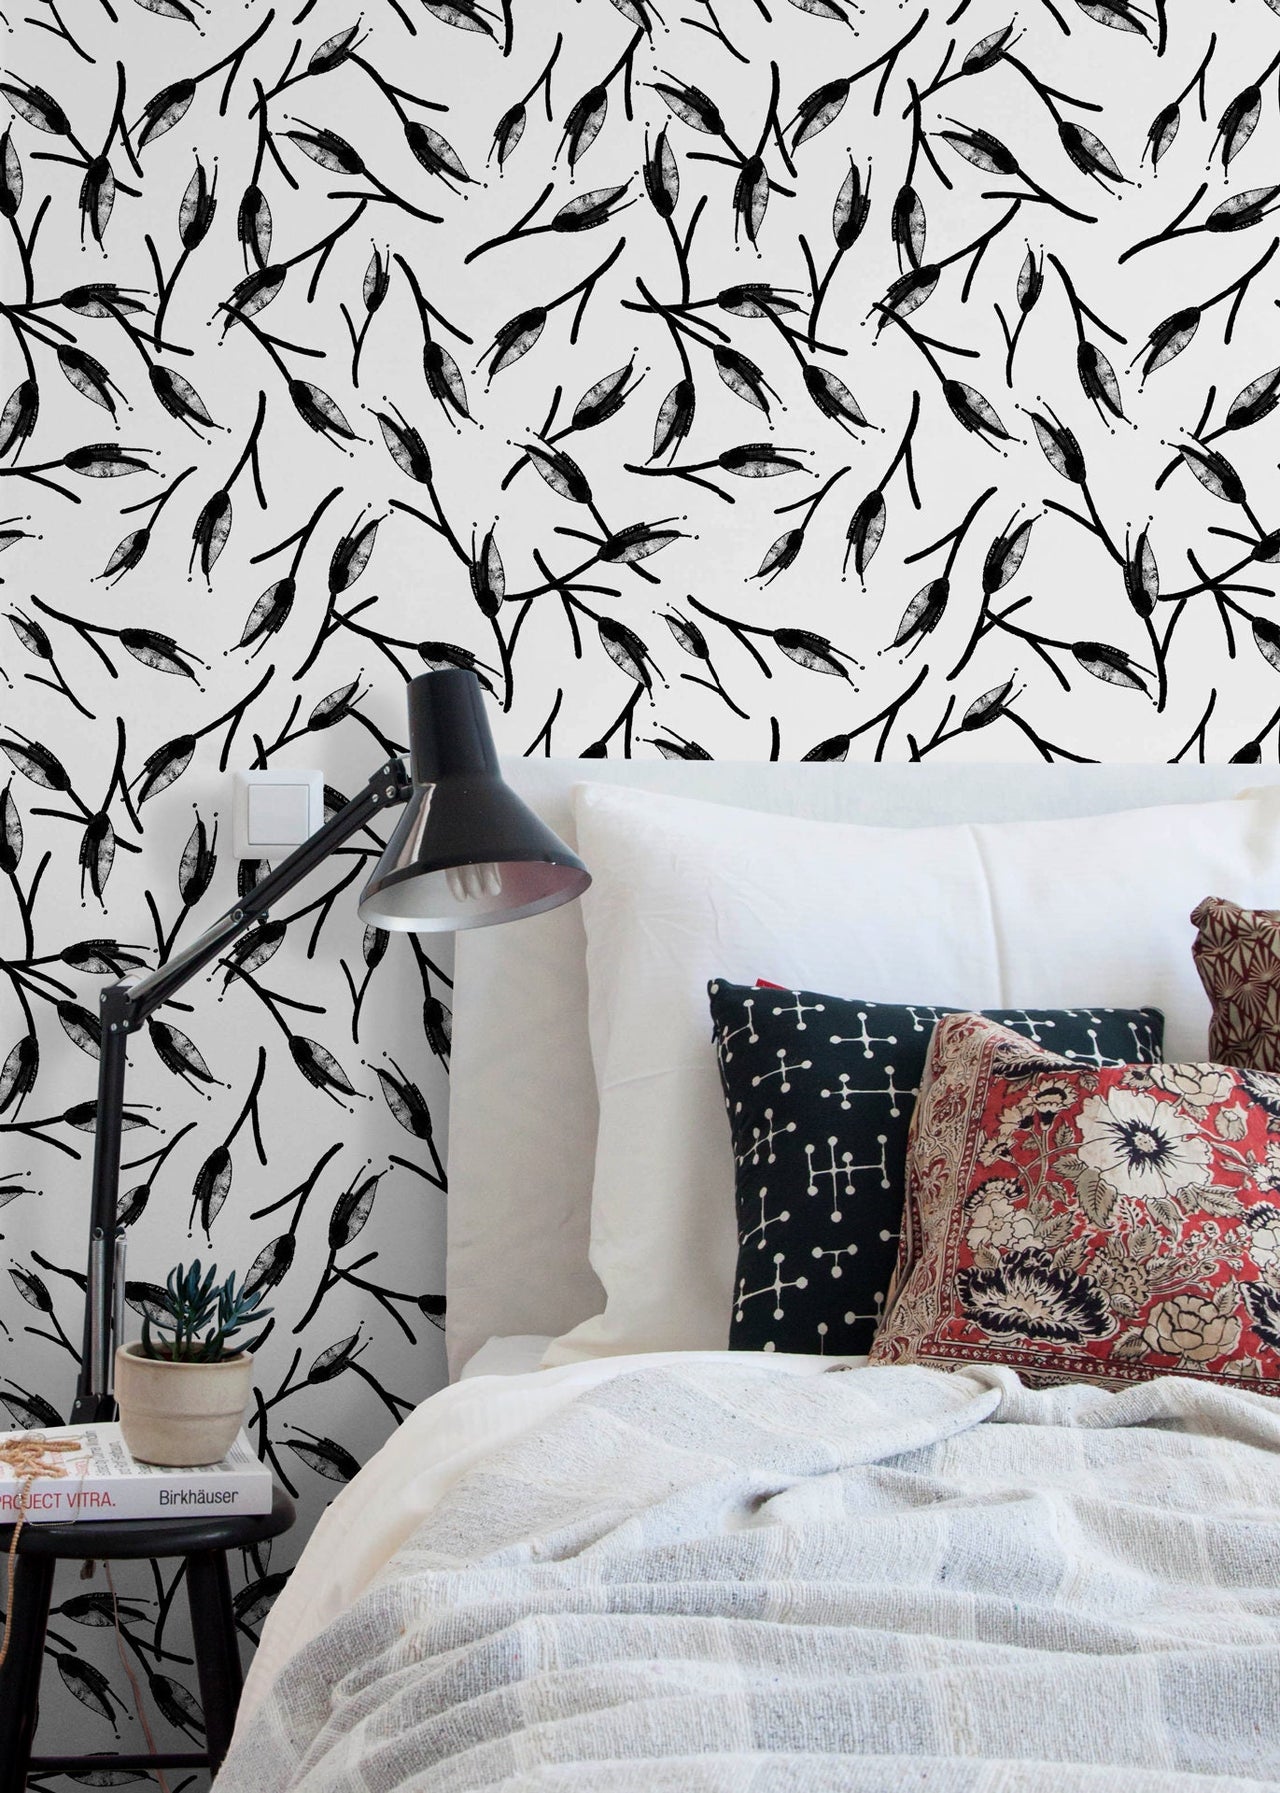 Wallpaper Peel and Stick Wallpaper Removable Wallpaper Home Decor Wall Art Wall Decor Room Decor / Black and White Leaves Wallpaper - B056